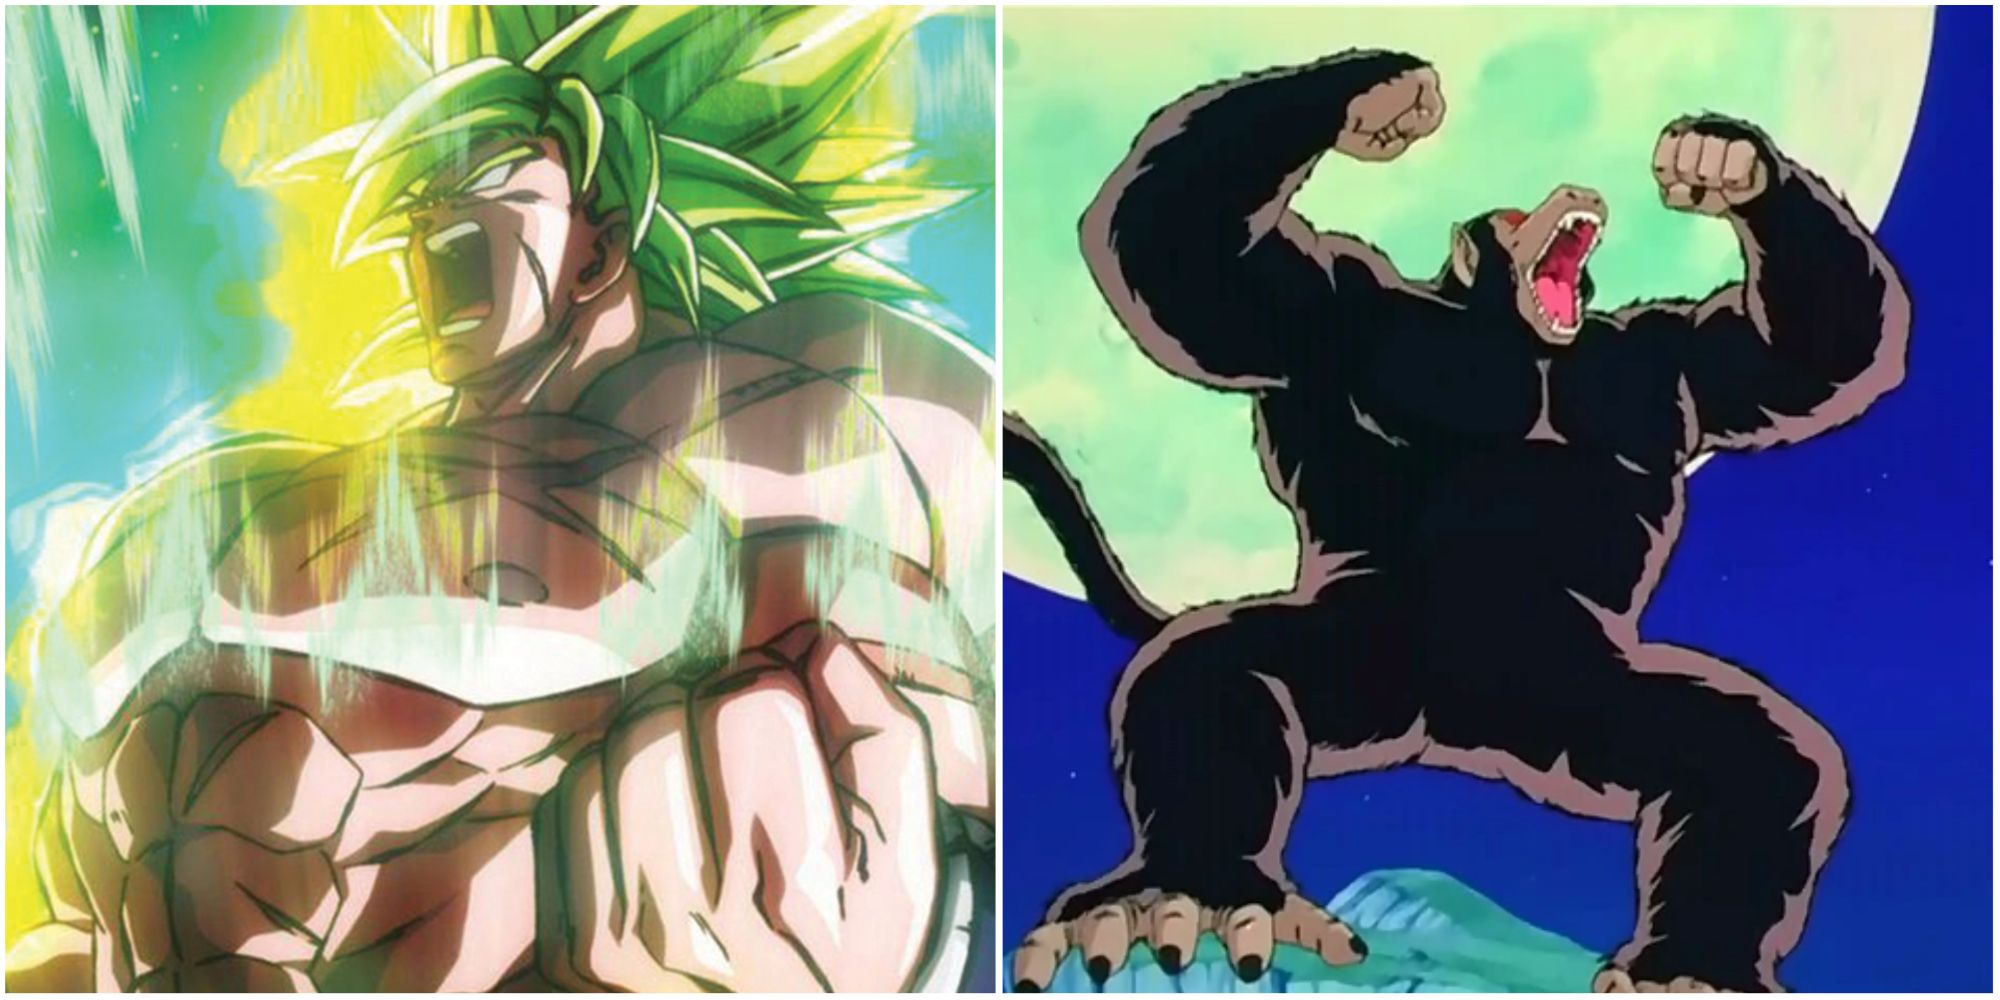 Broly in Dragon Ball Super: Broly and Oozaru in Dragon Ball Z